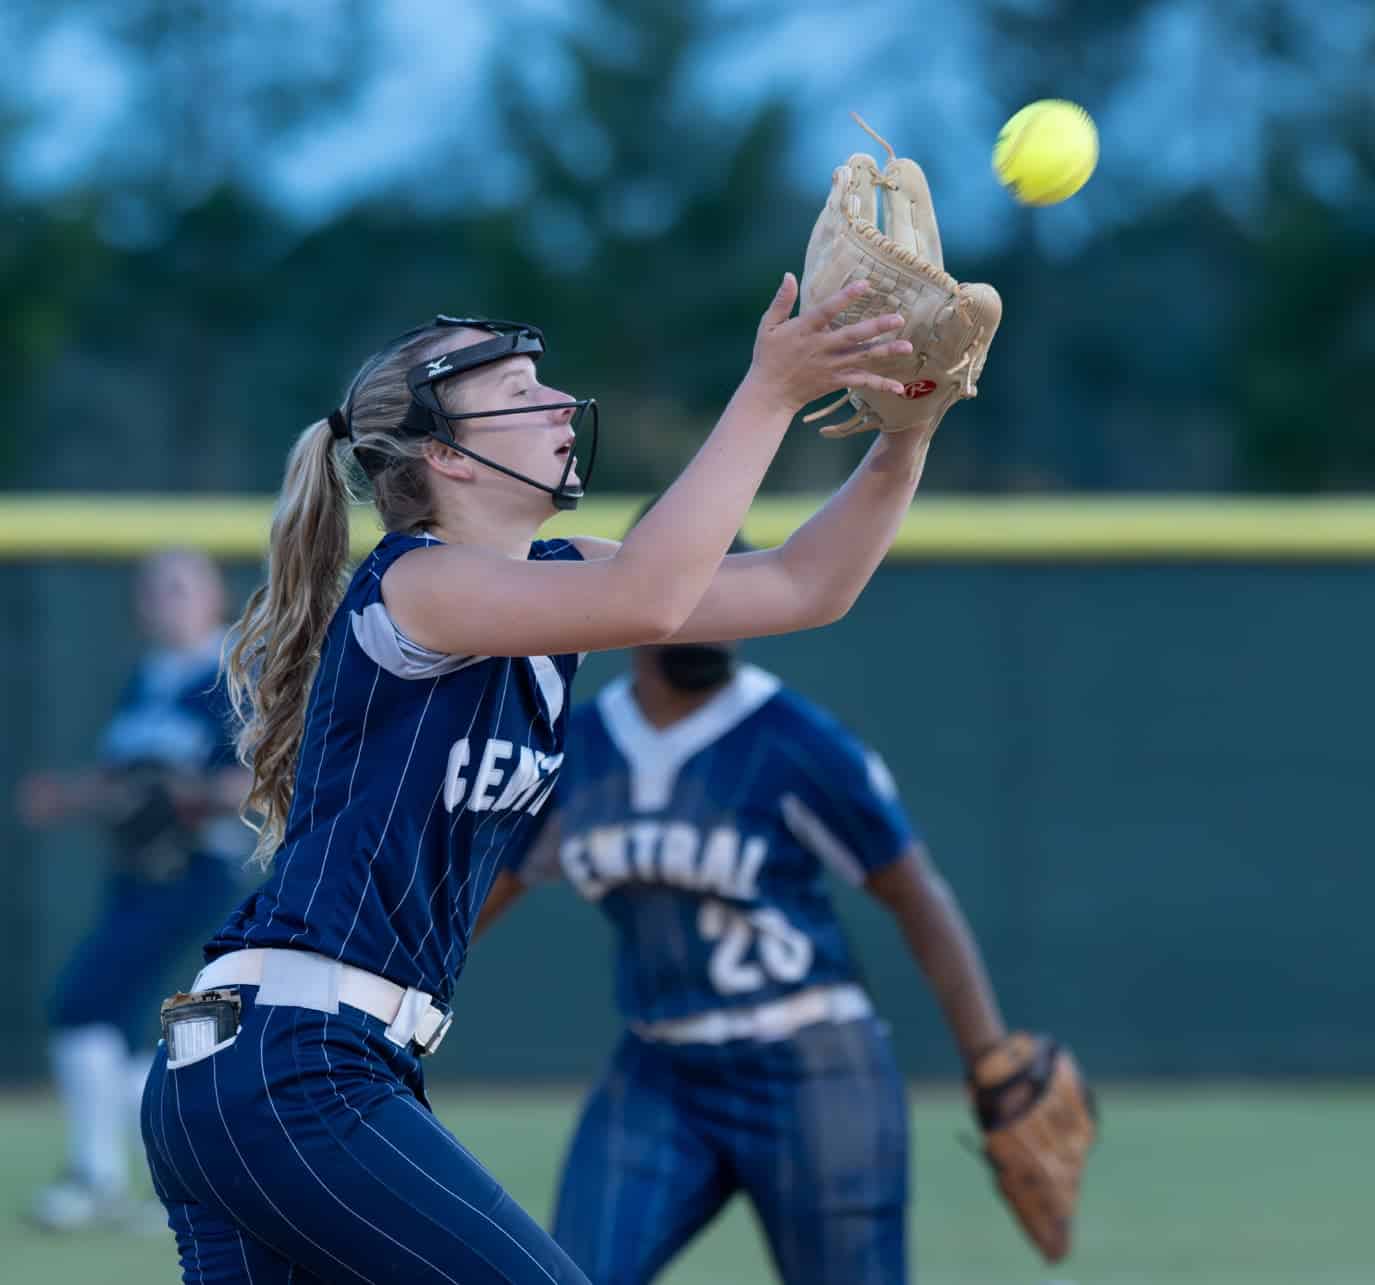 Central High’s shortstop, Alva Frechette make sure of a catch during the 4A District 5 playoff game against Weeki Wachee High. Photo by [Joseph Dicristofalo]